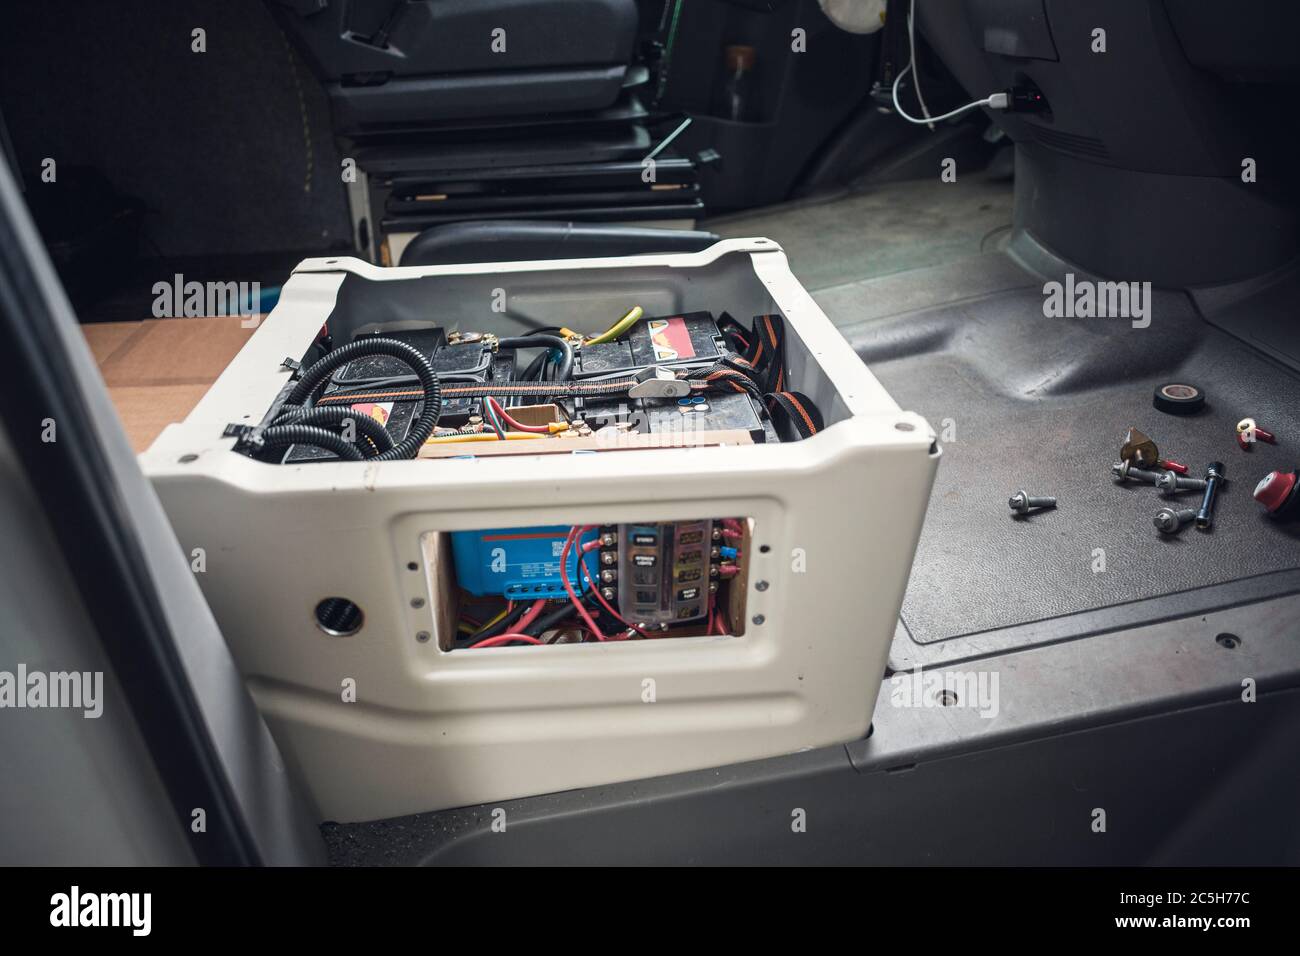 Electronics build into the front seat of a camper van Stock Photo